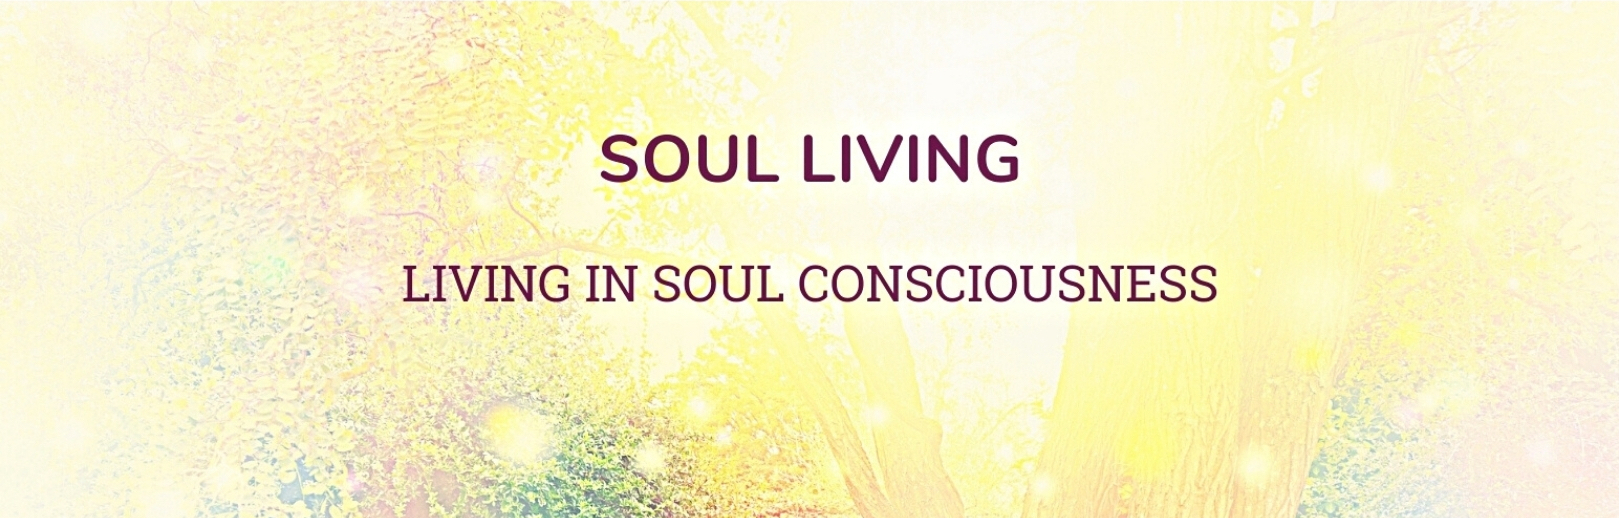 Soul Living: Intro Goes Here